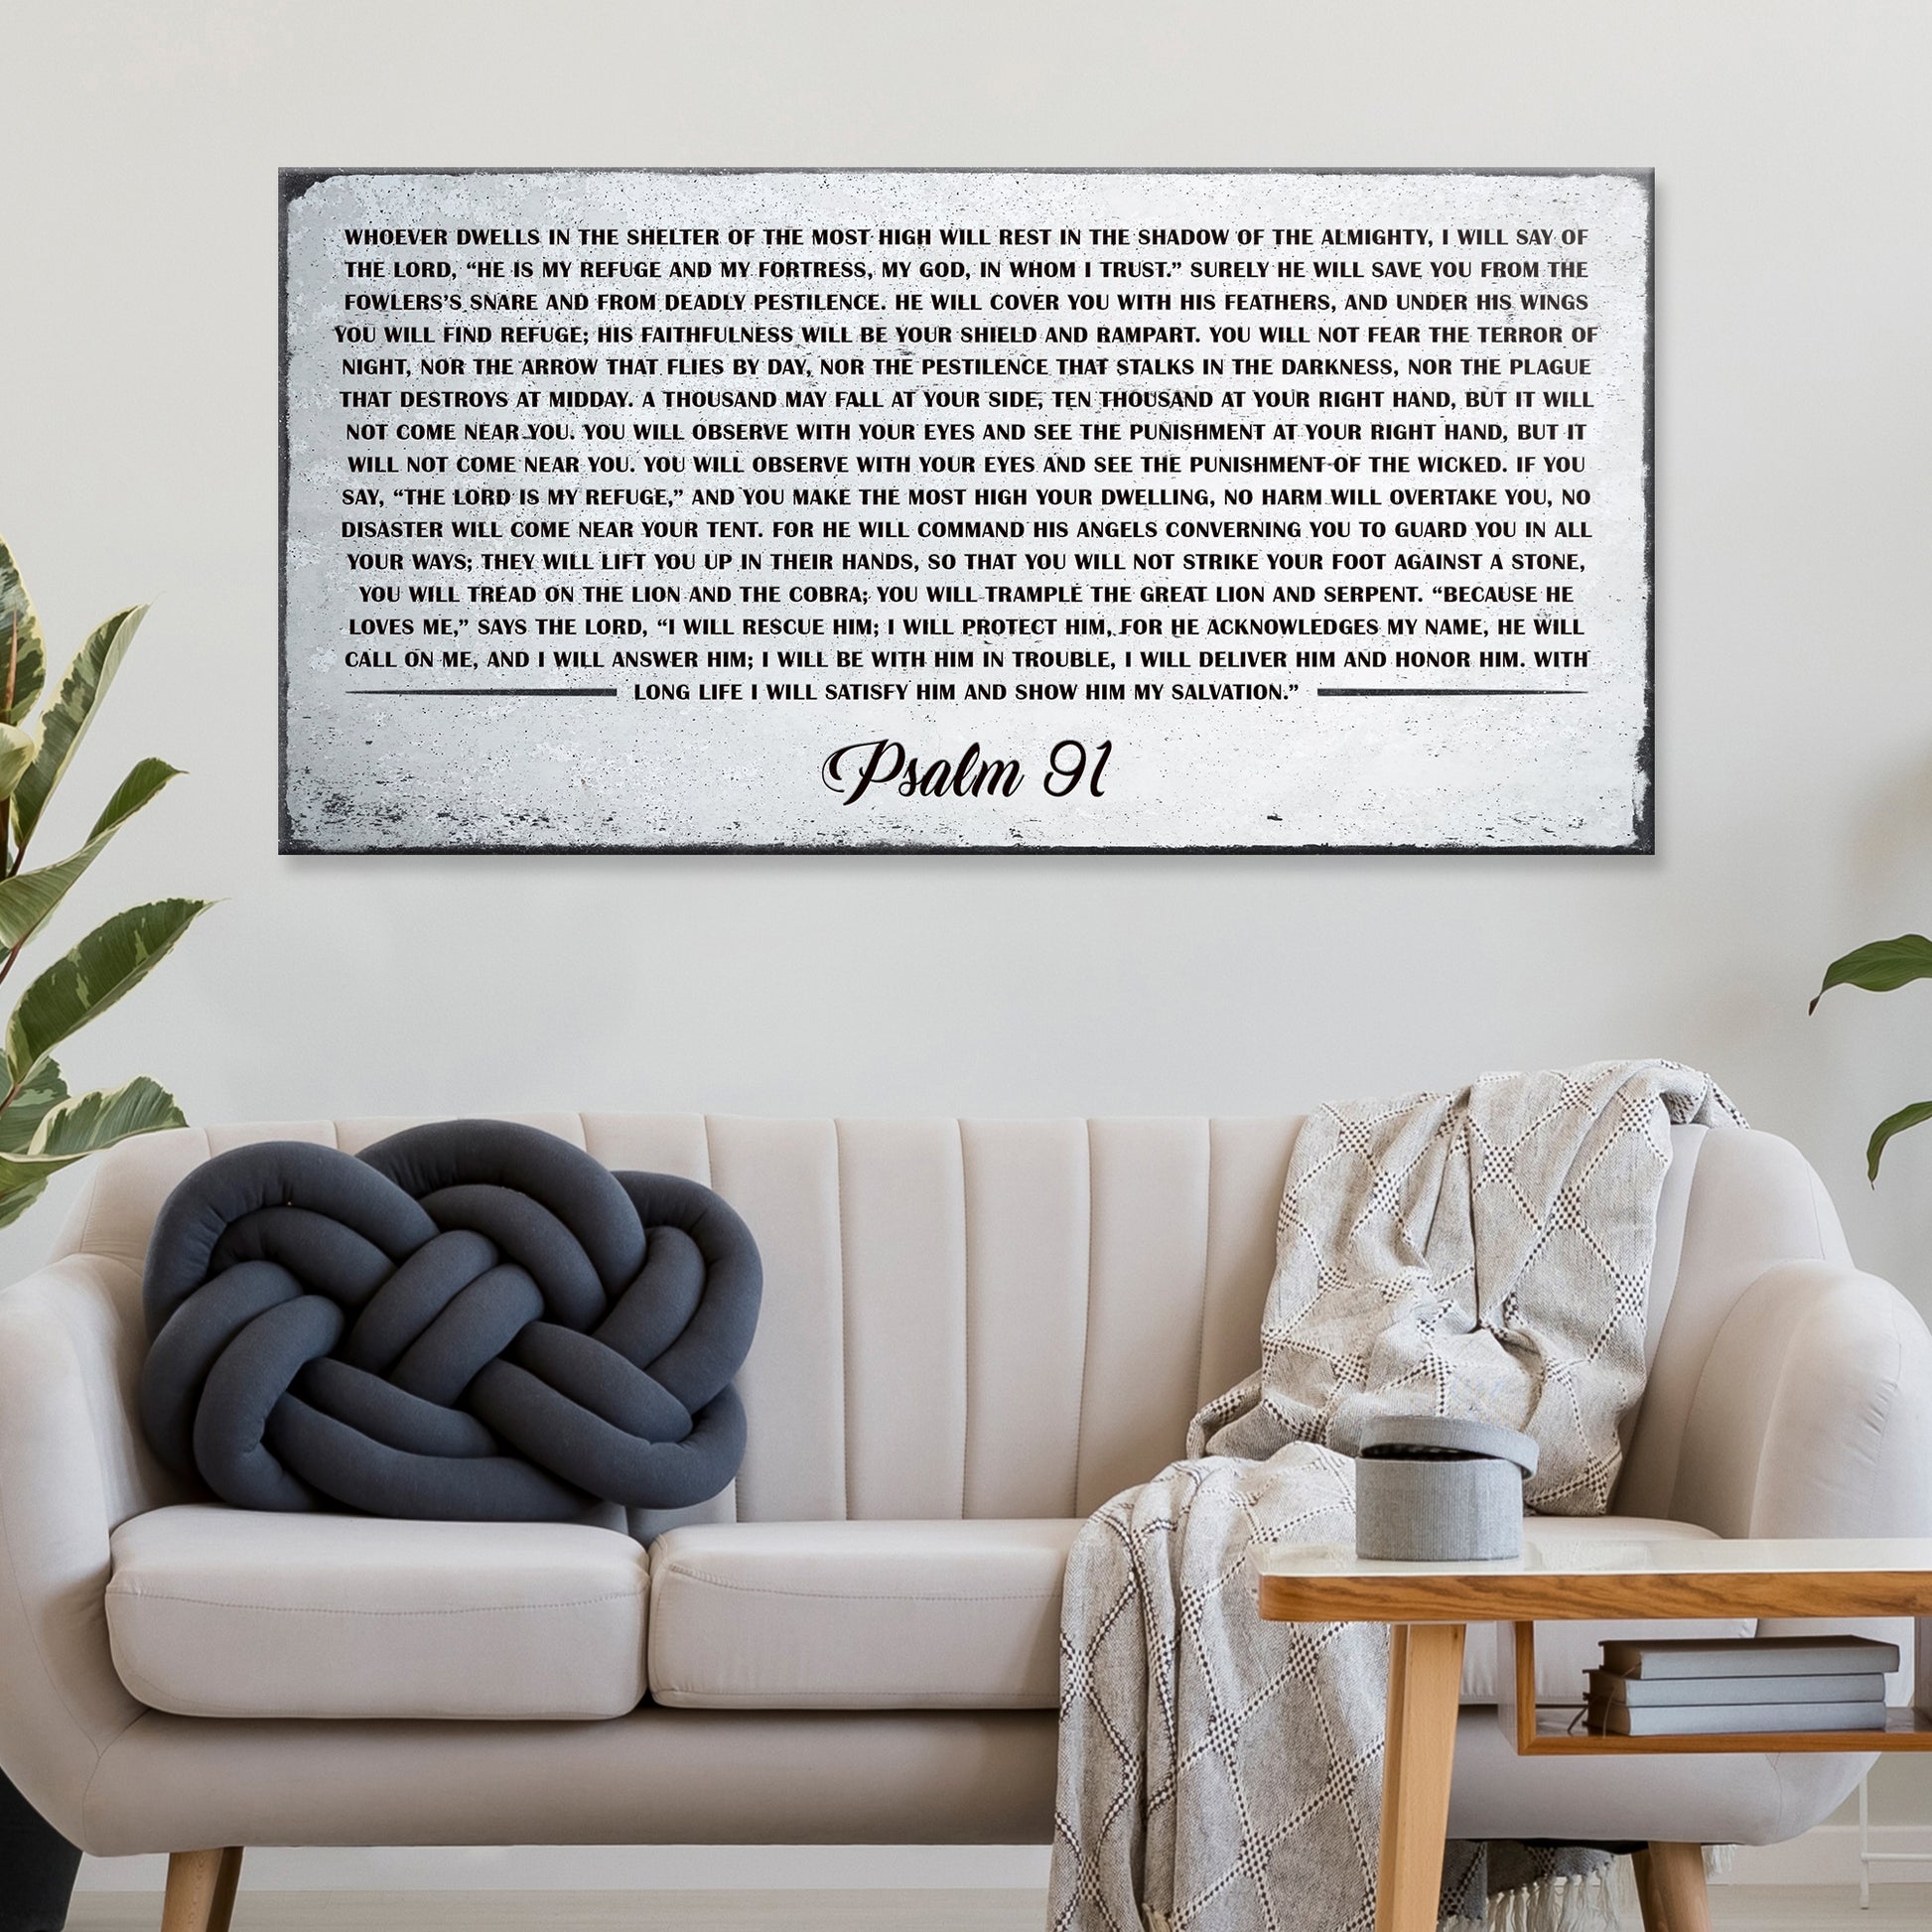 Psalm 91 - Whoever Dwells In The Shelter Of The Most High Sign IV - Image by Tailored Canvases